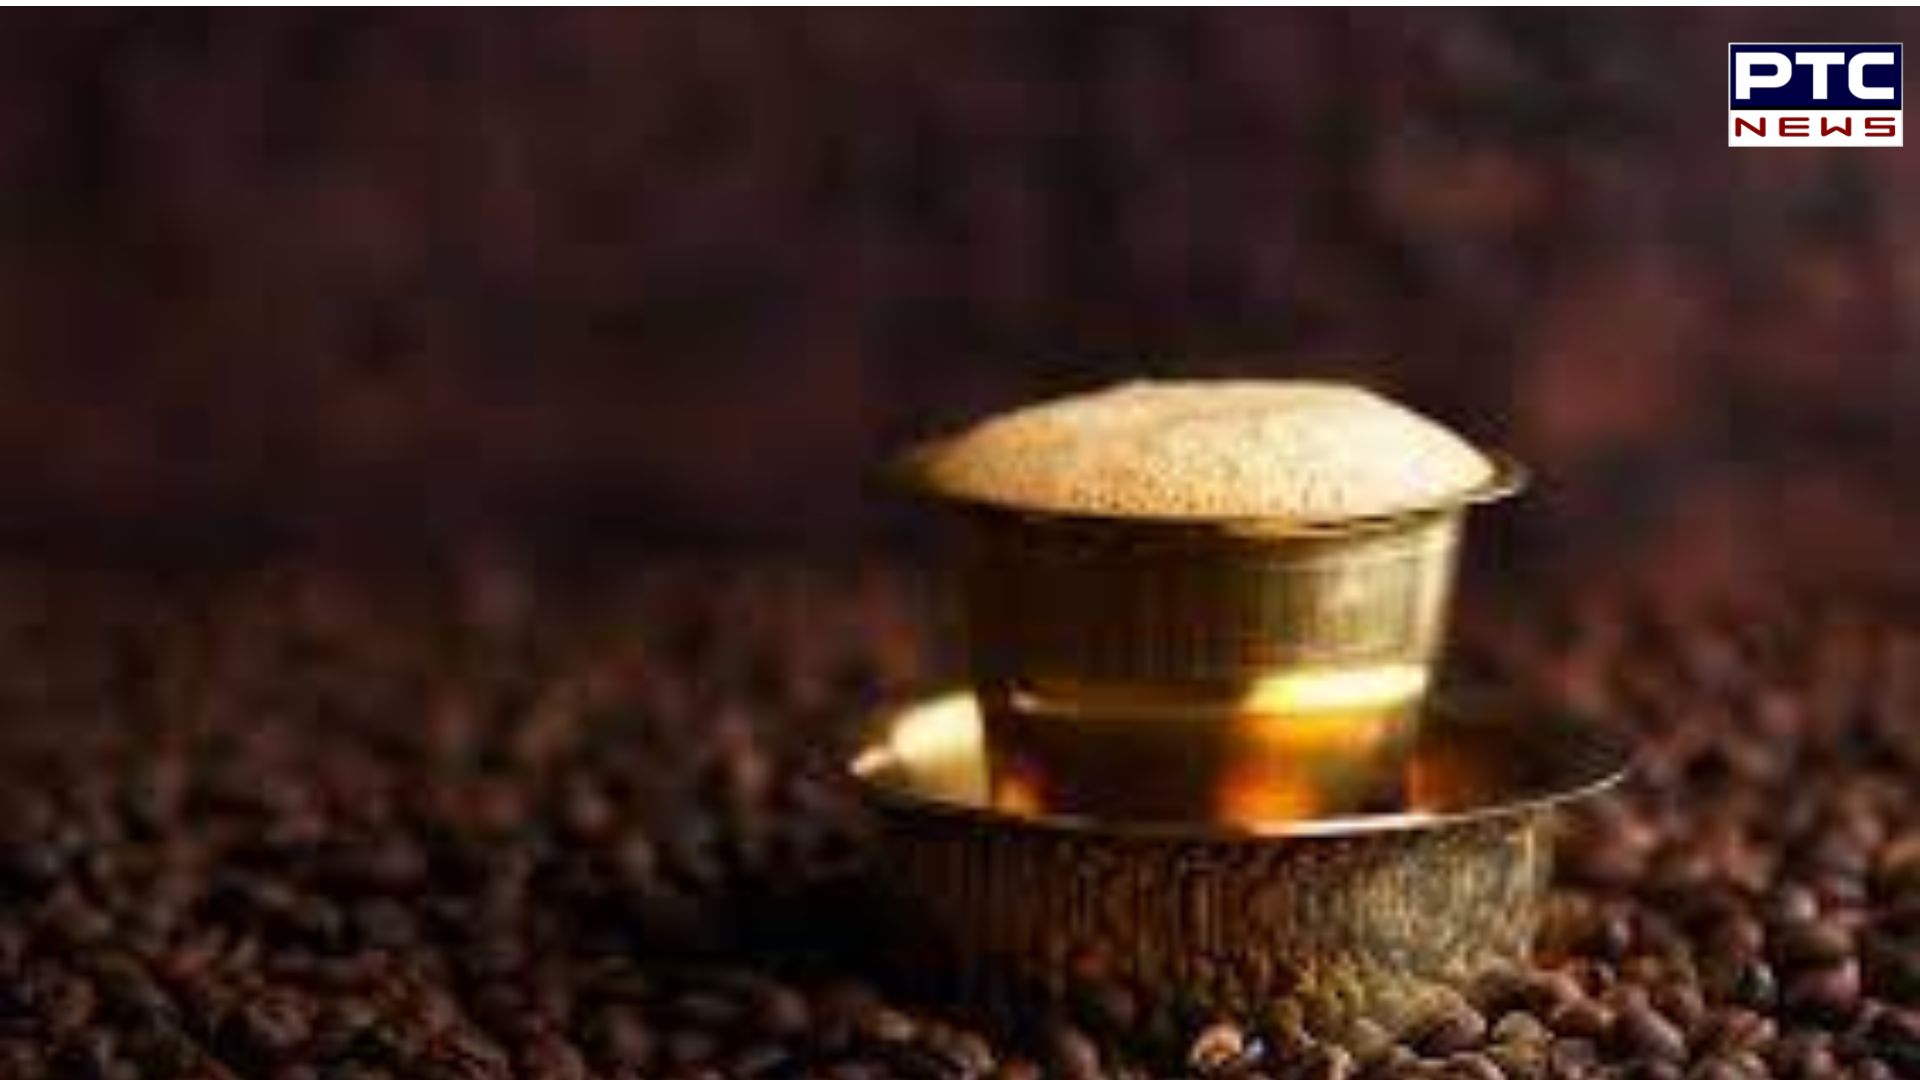 South Indian filter coffee earns No. 2 spot in 'Top 38 Coffees In The World' ranking